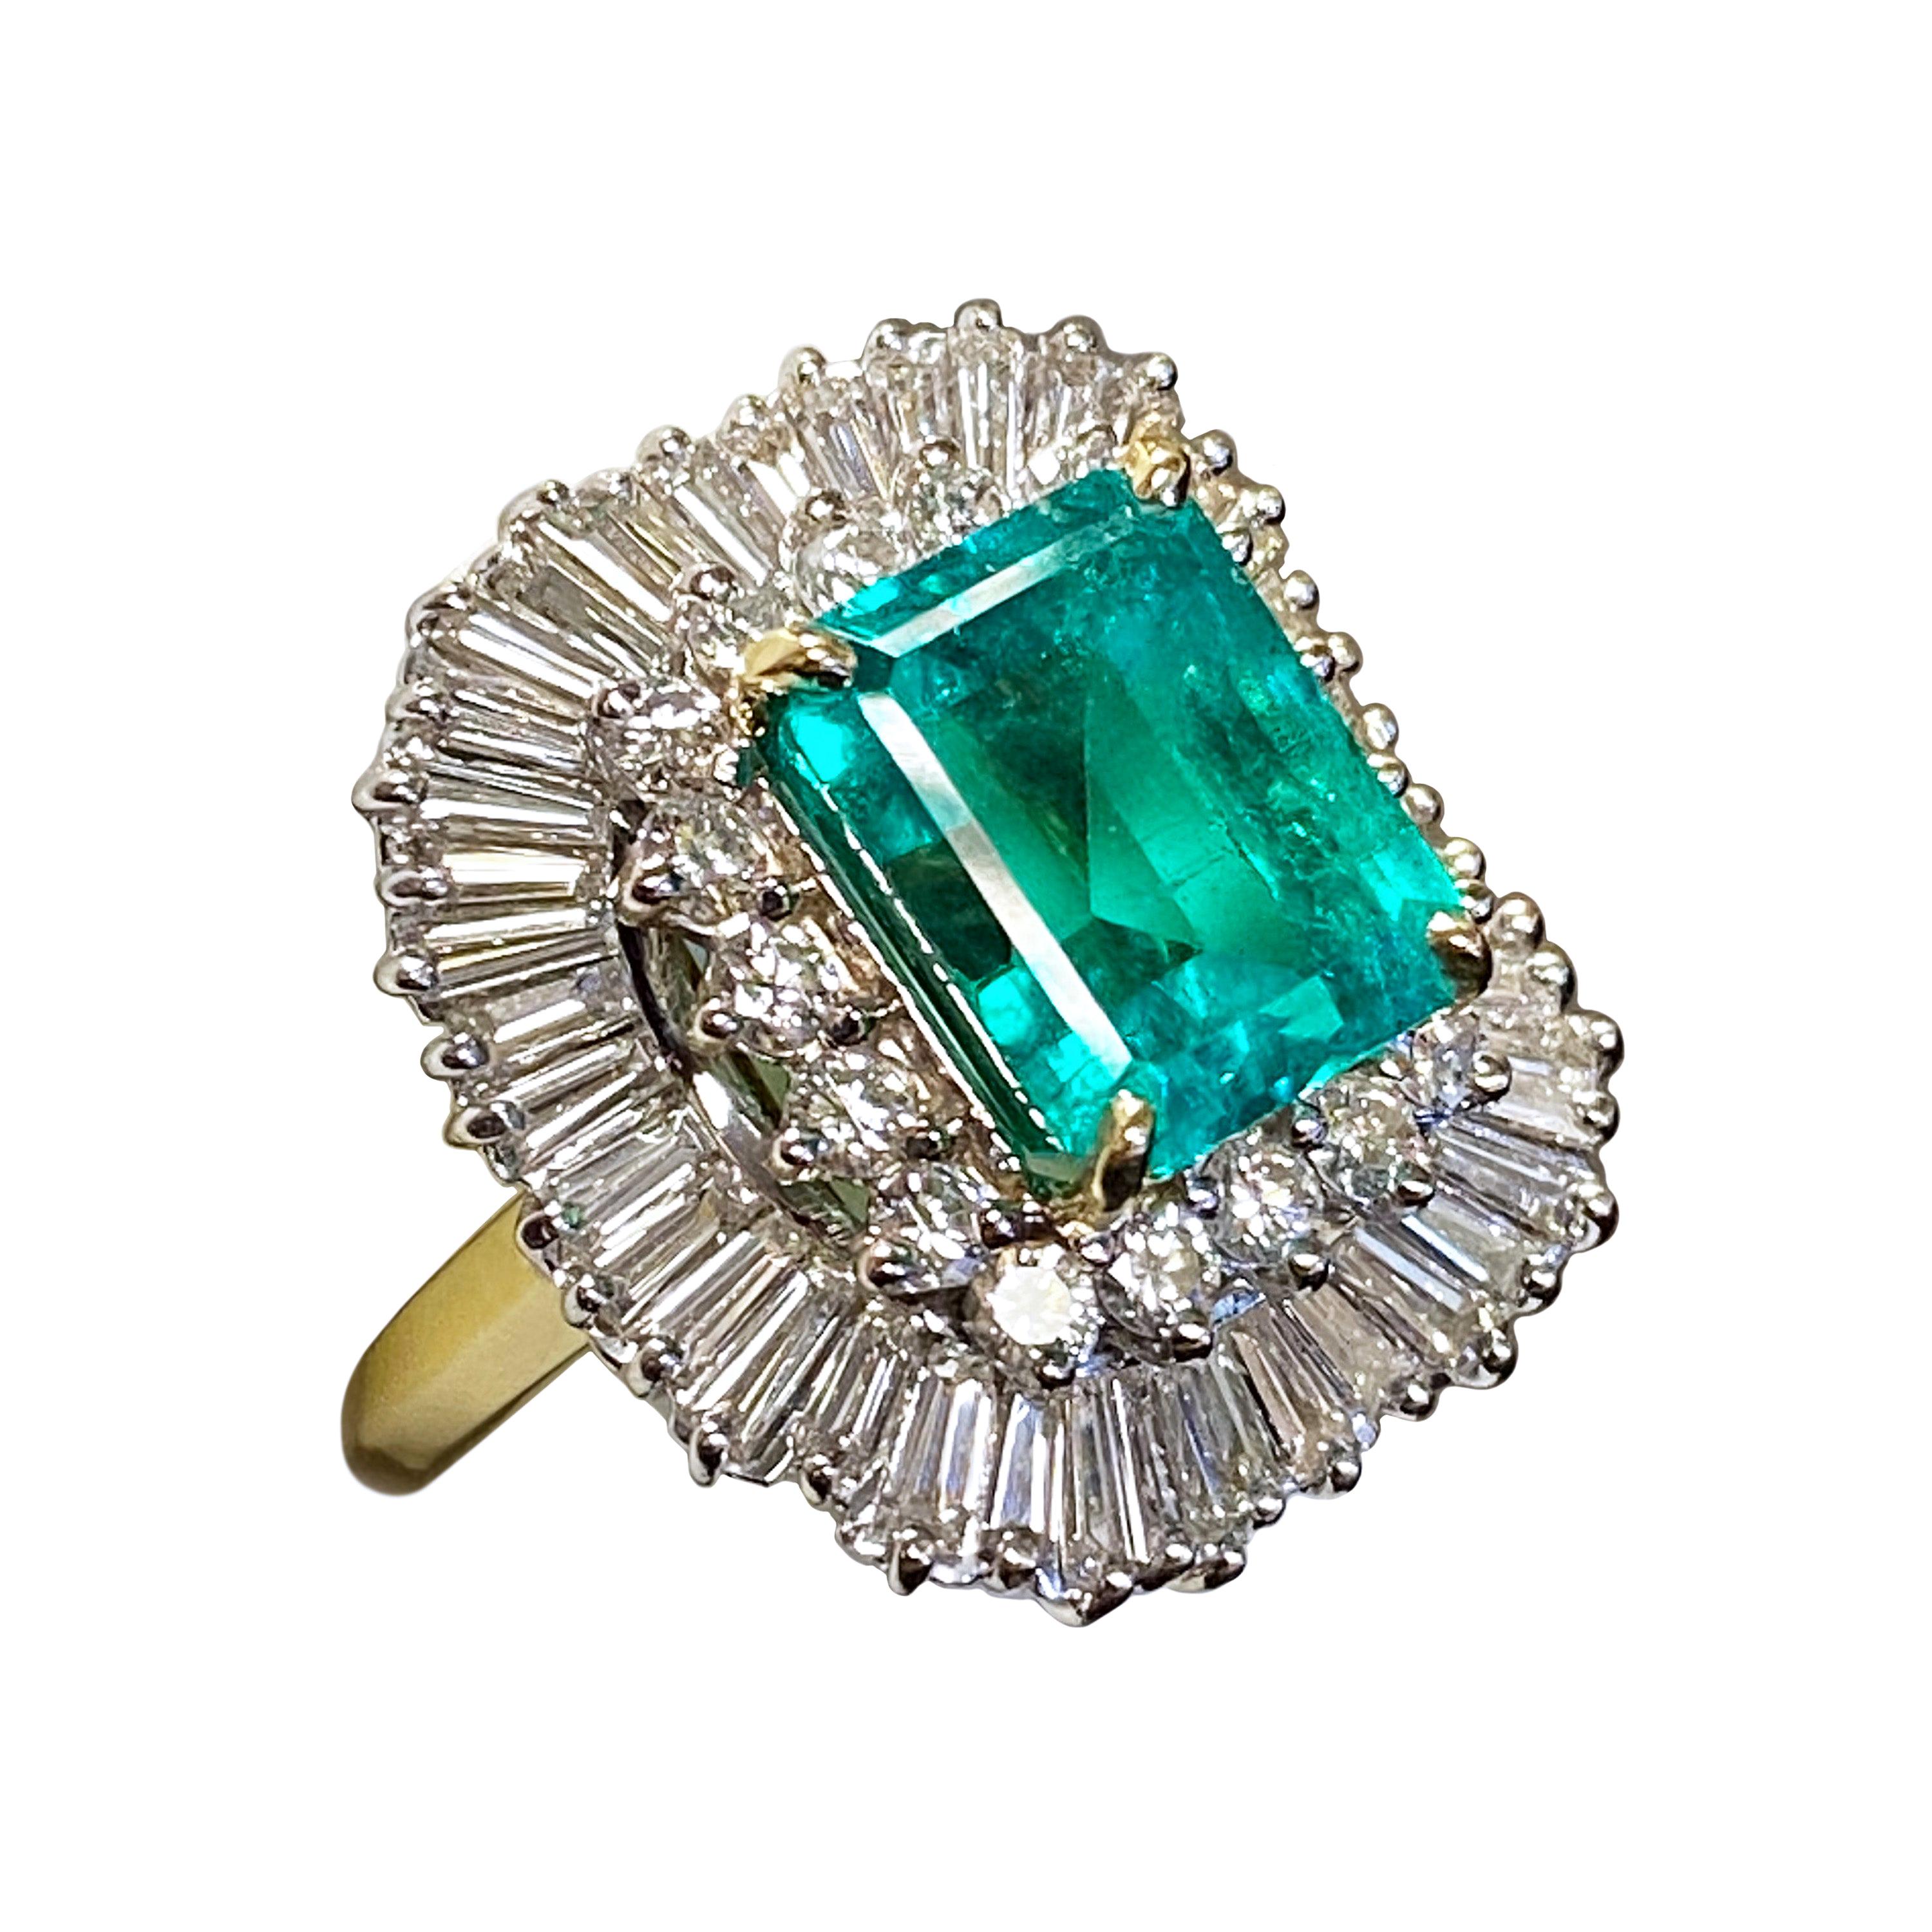 Large Colombian 6.76 Carat Emerald and Diamond Cocktail Ring